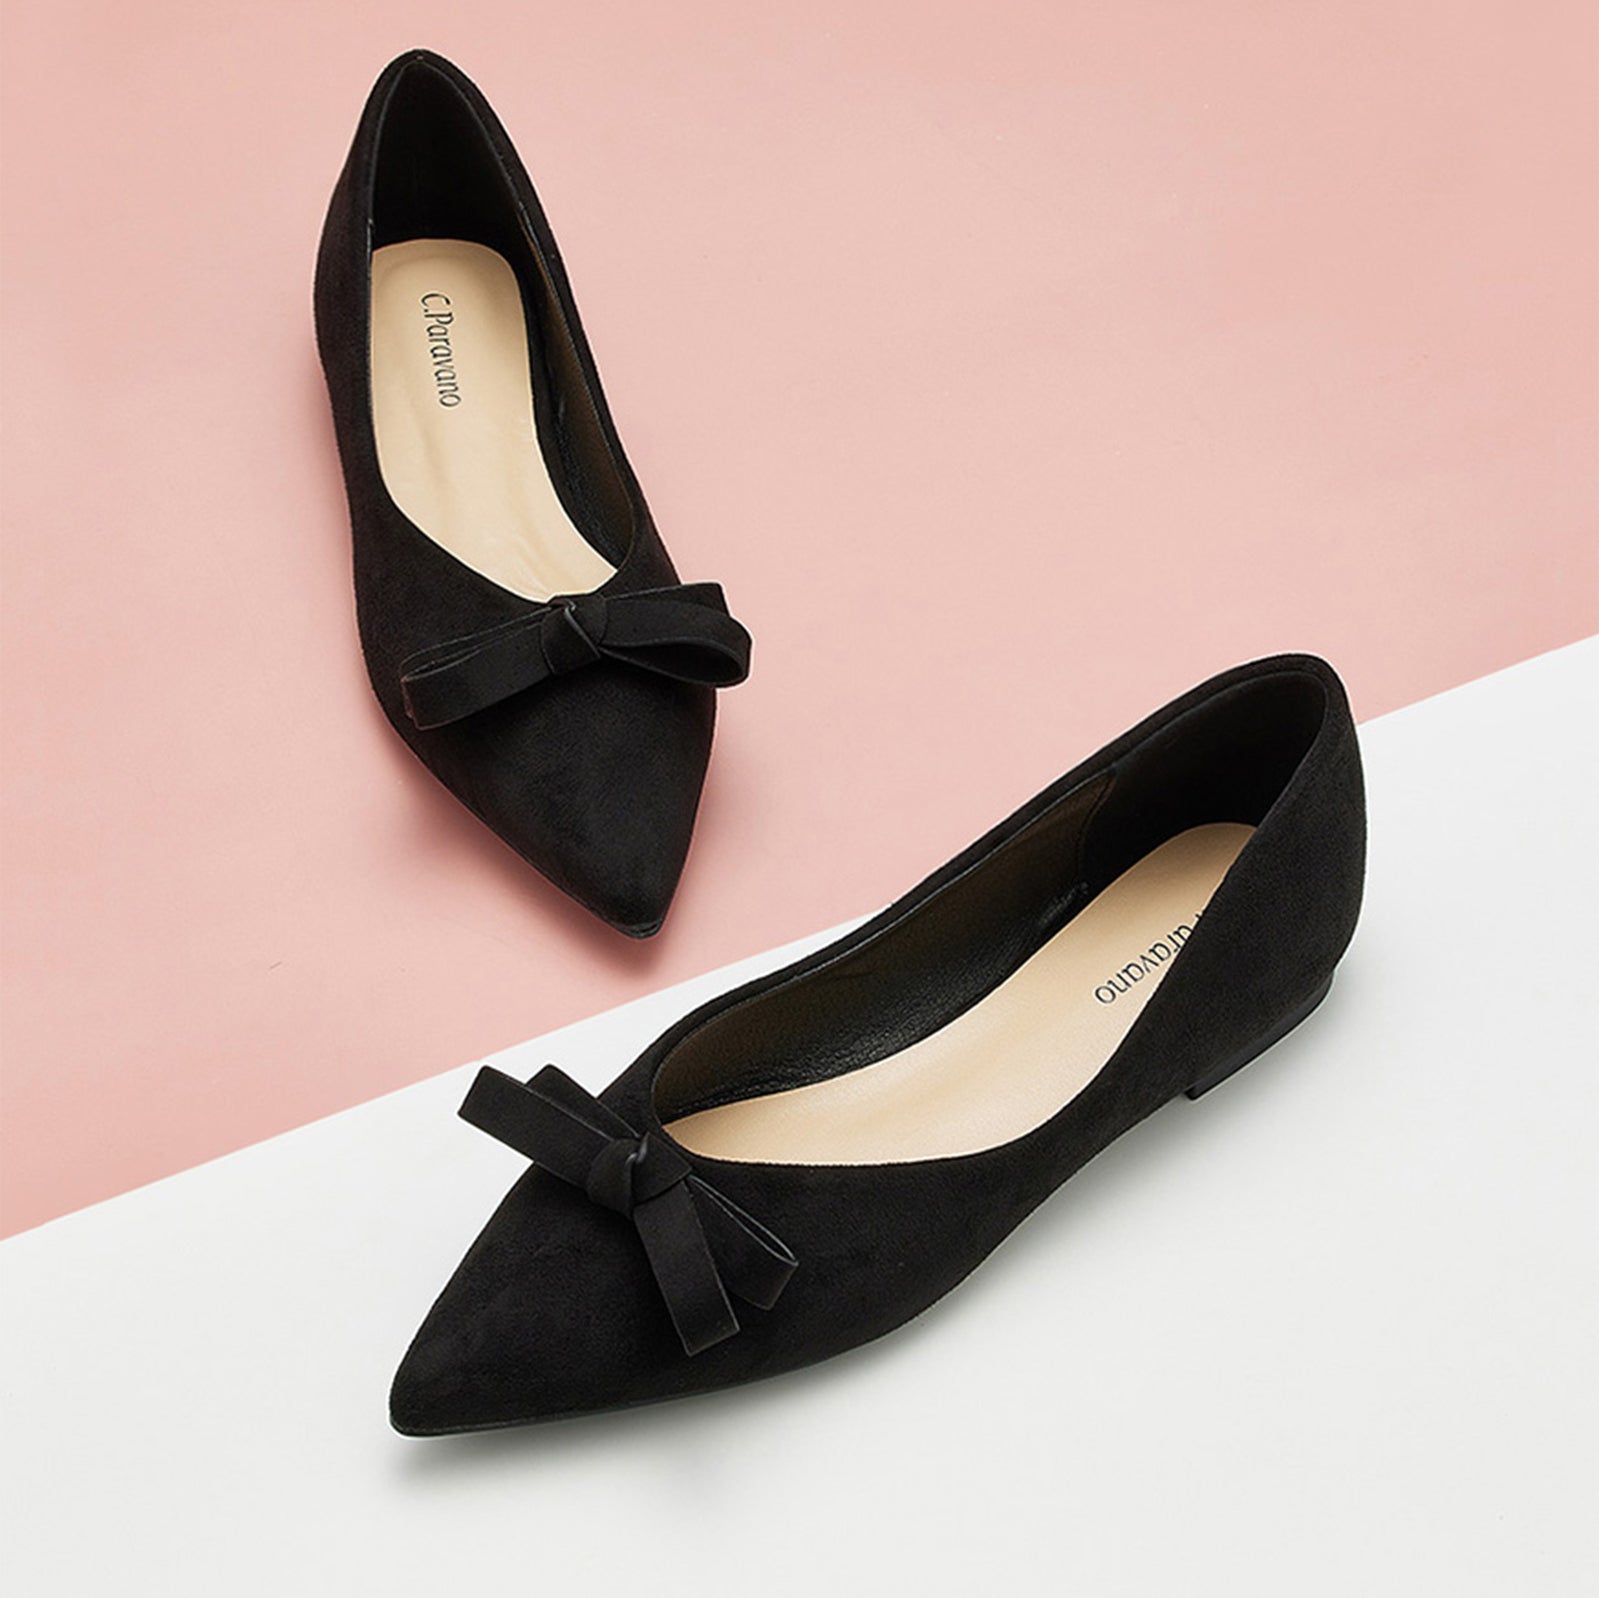 lack Suede Ballet Flats, perfect for a confident and fashionable look in any urban setting.